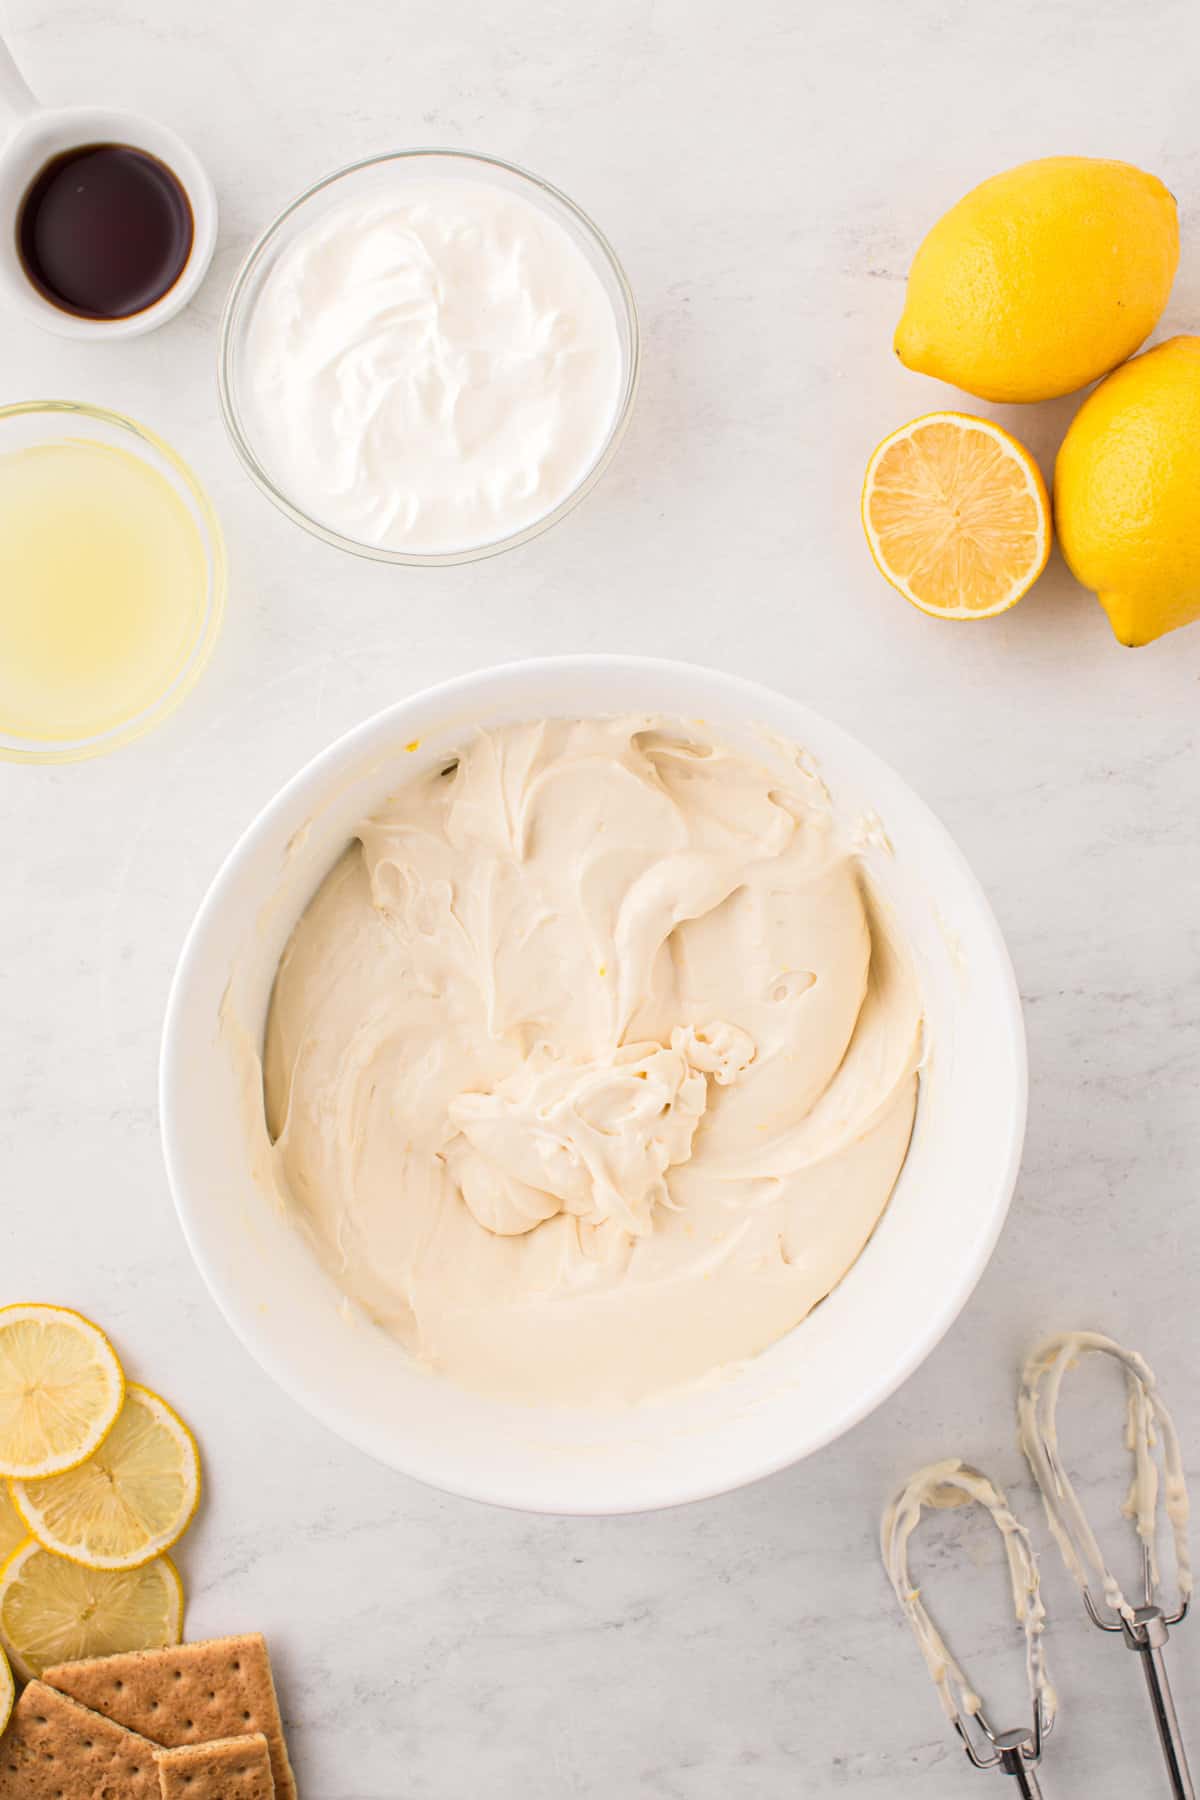 Perfectly blended Adding softened cream cheese block to mixed Lemon Cheesecake ingredients in mixing bowl